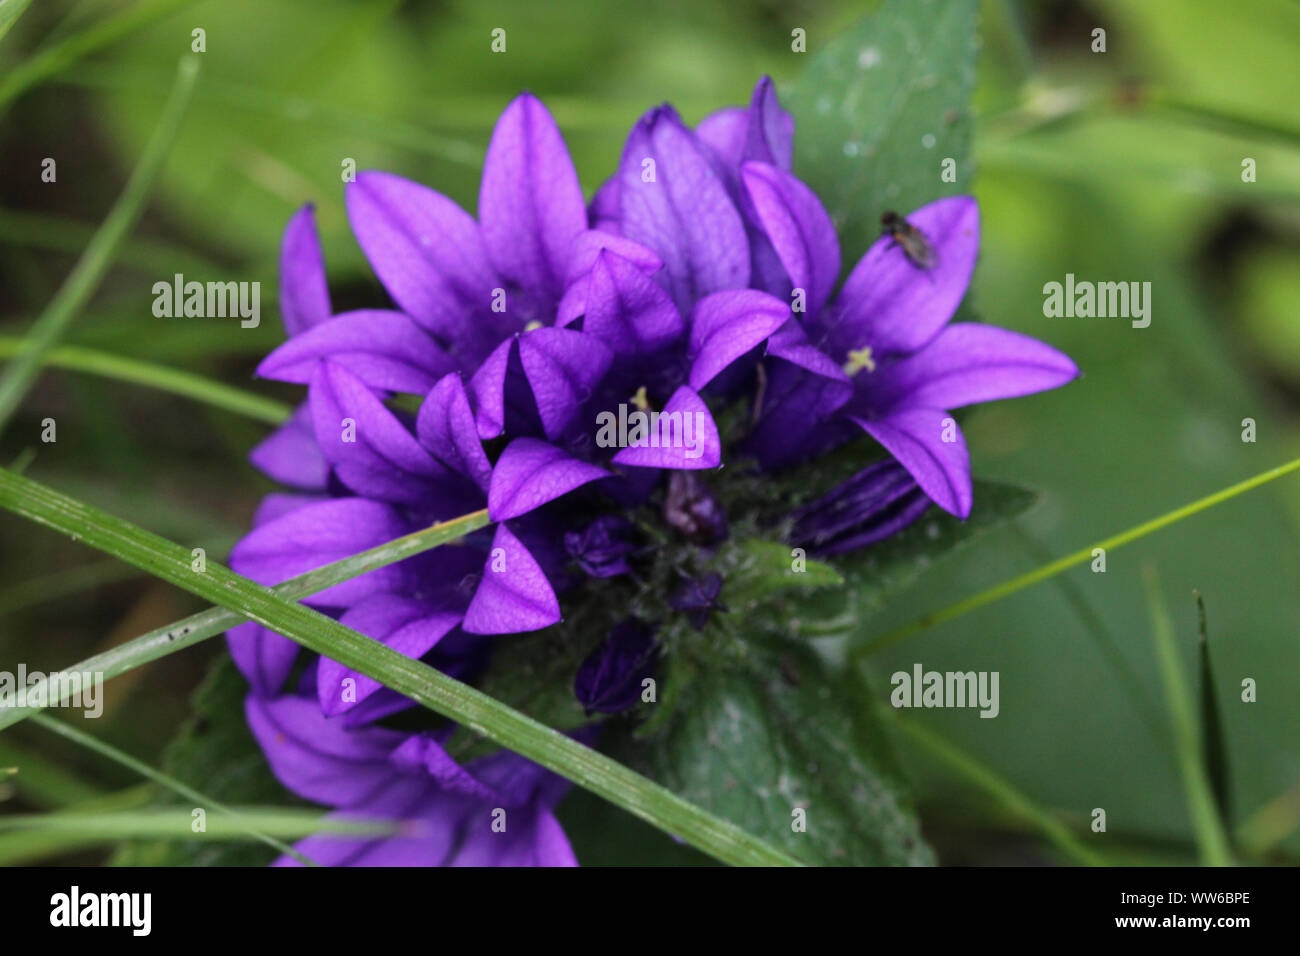 close up of Campanula glomerata flower, known by the common names clustered bellflower or Dane's blood Stock Photo